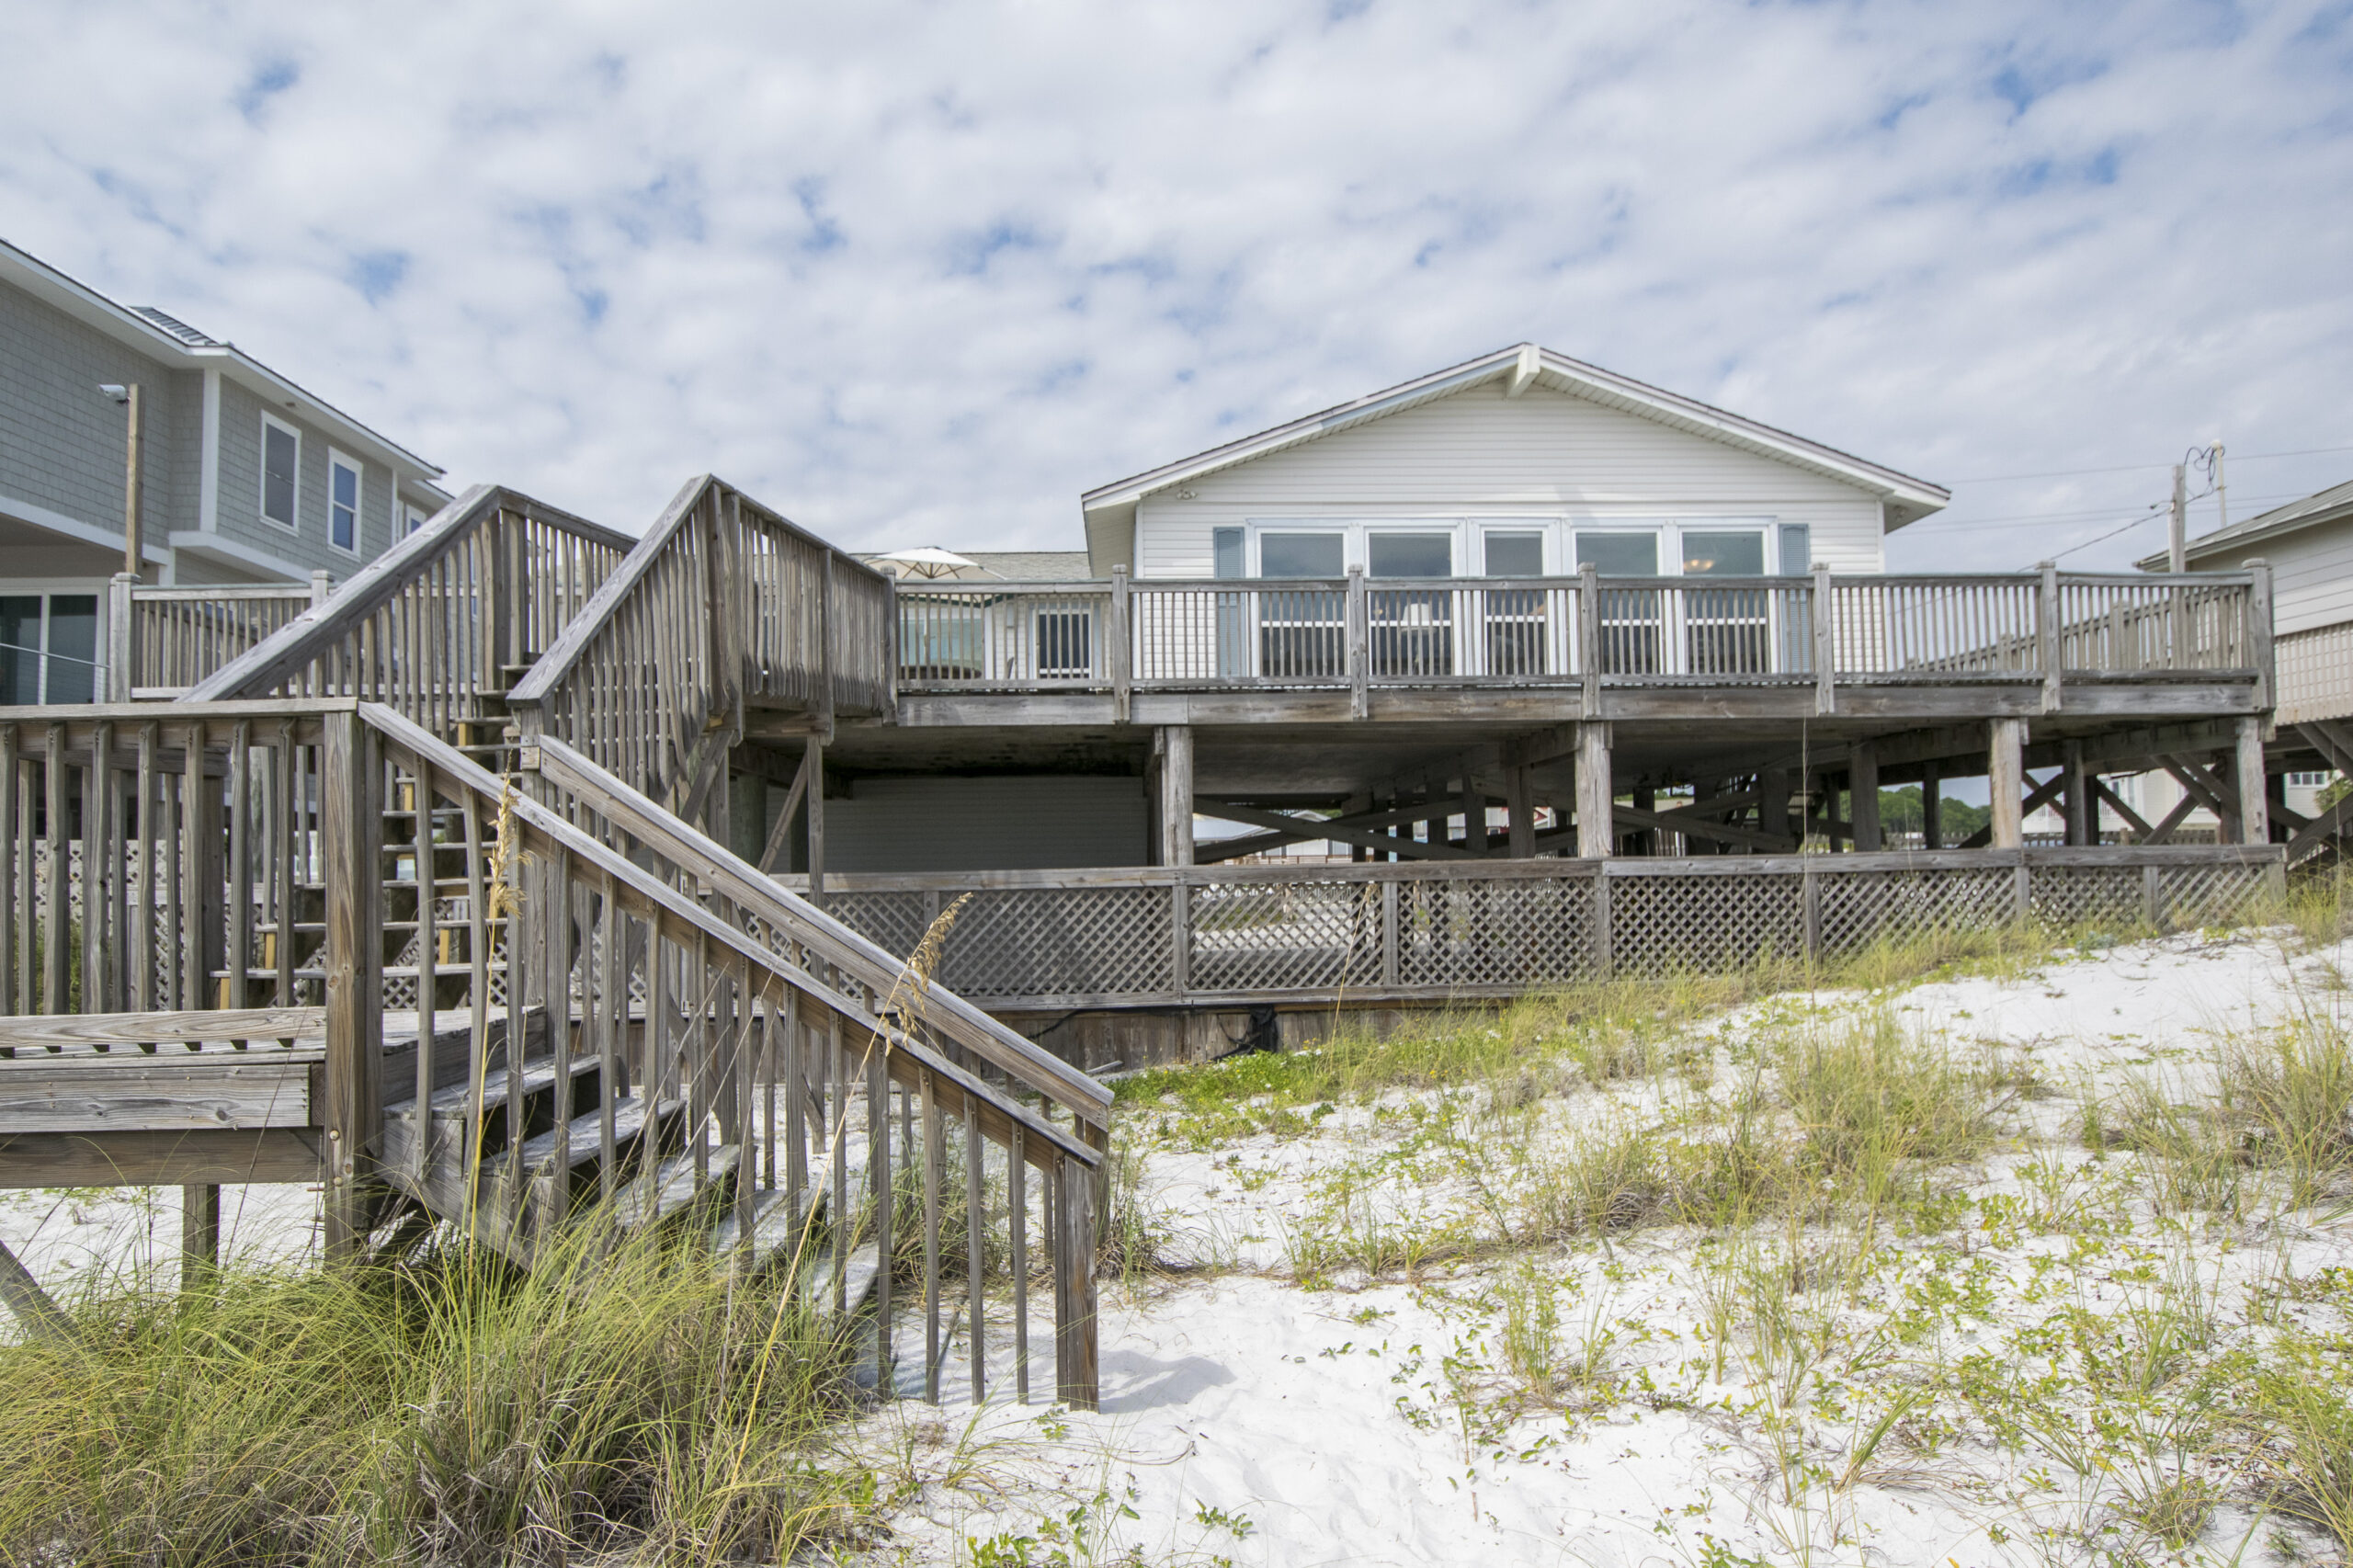 Photo of Beach Front Cottage, a rental House located in Dune Allen Beach